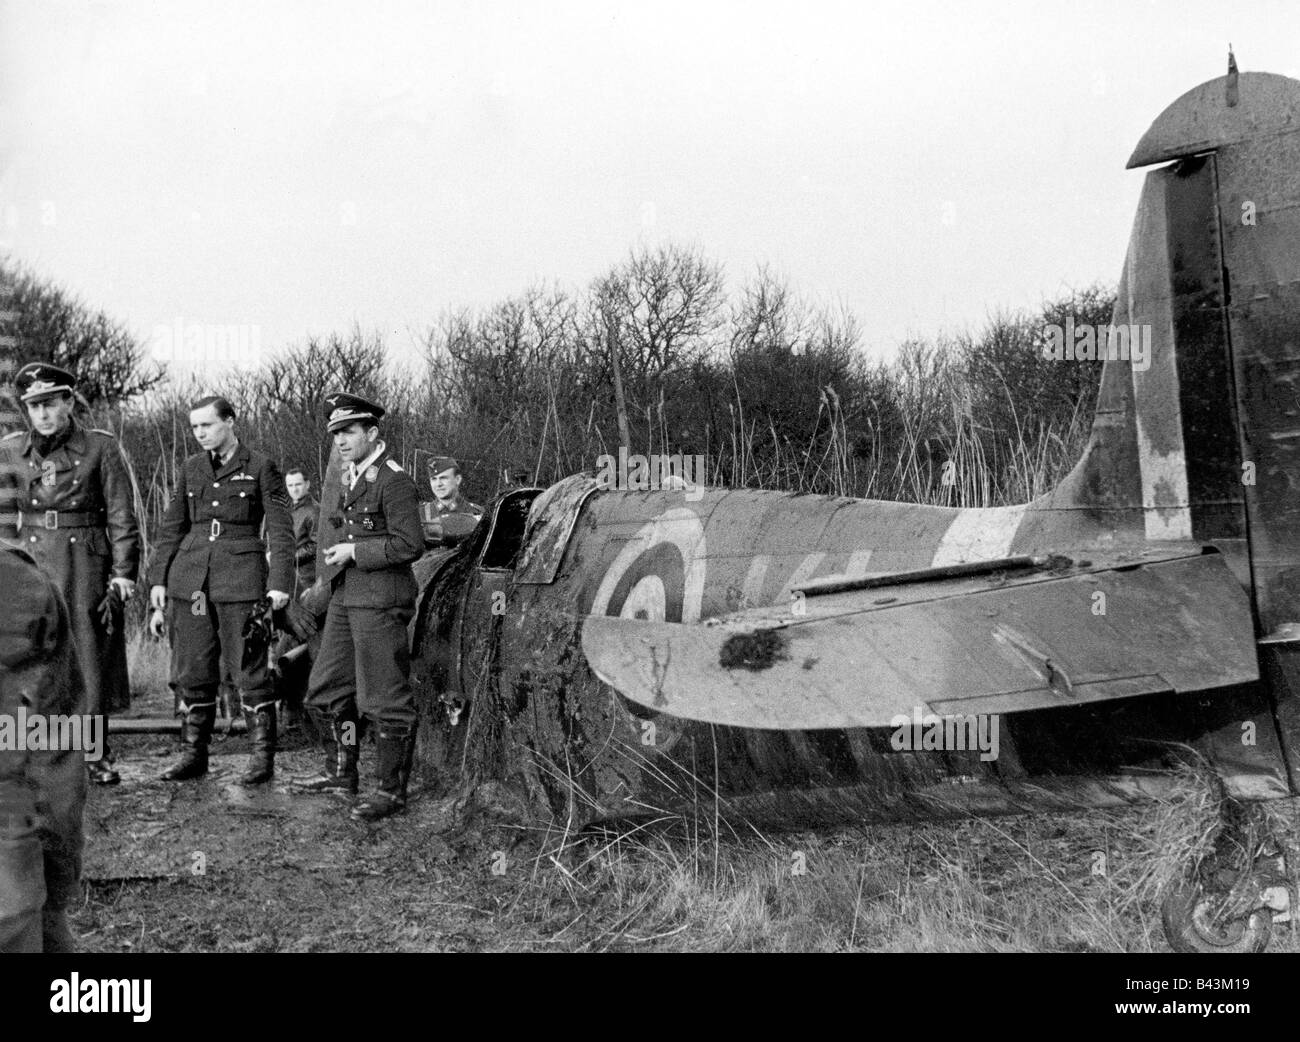 events, Second World War / WWII, aerial warfare, aircraft, crashed / damaged, shot down British fighter Supermarine Spitfire, German officers with the captured British pilot at the site of the crash, France, 1942, Stock Photo